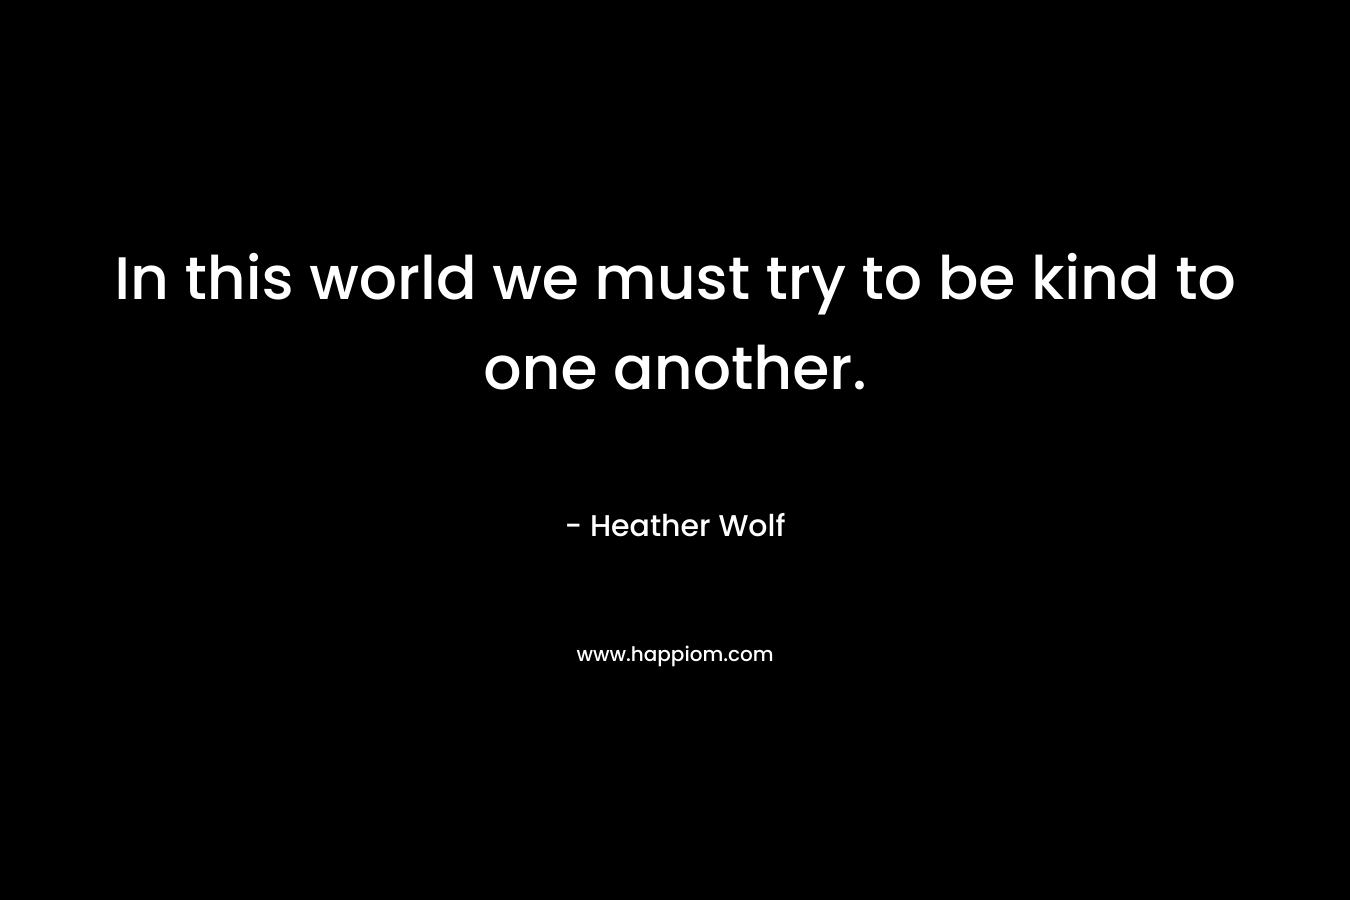 In this world we must try to be kind to one another.